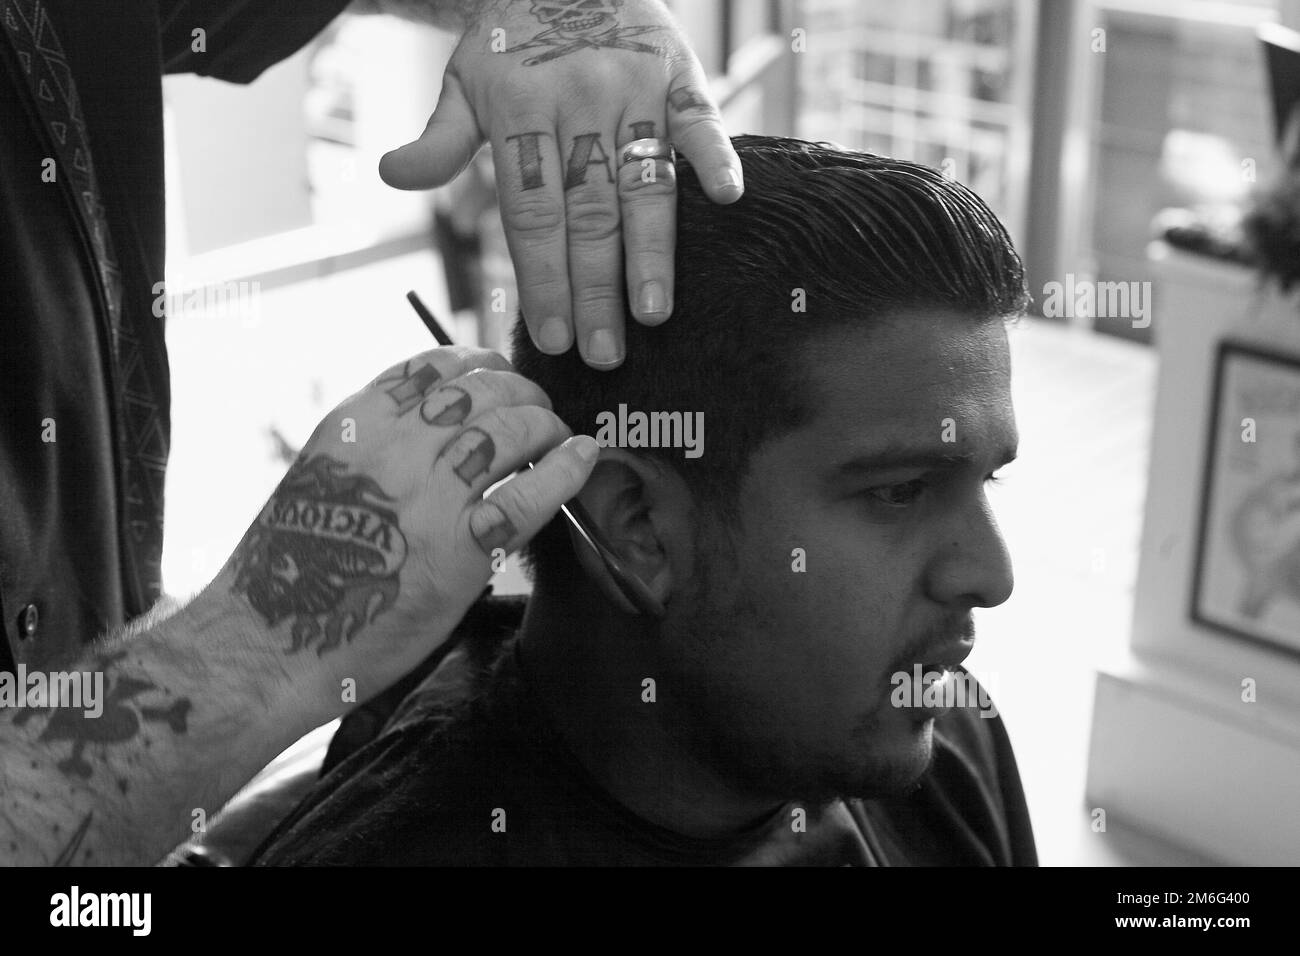 Barber is cutting young man hair. Side view of man getting short hair trimming at barber shop with scissors Stock Photo